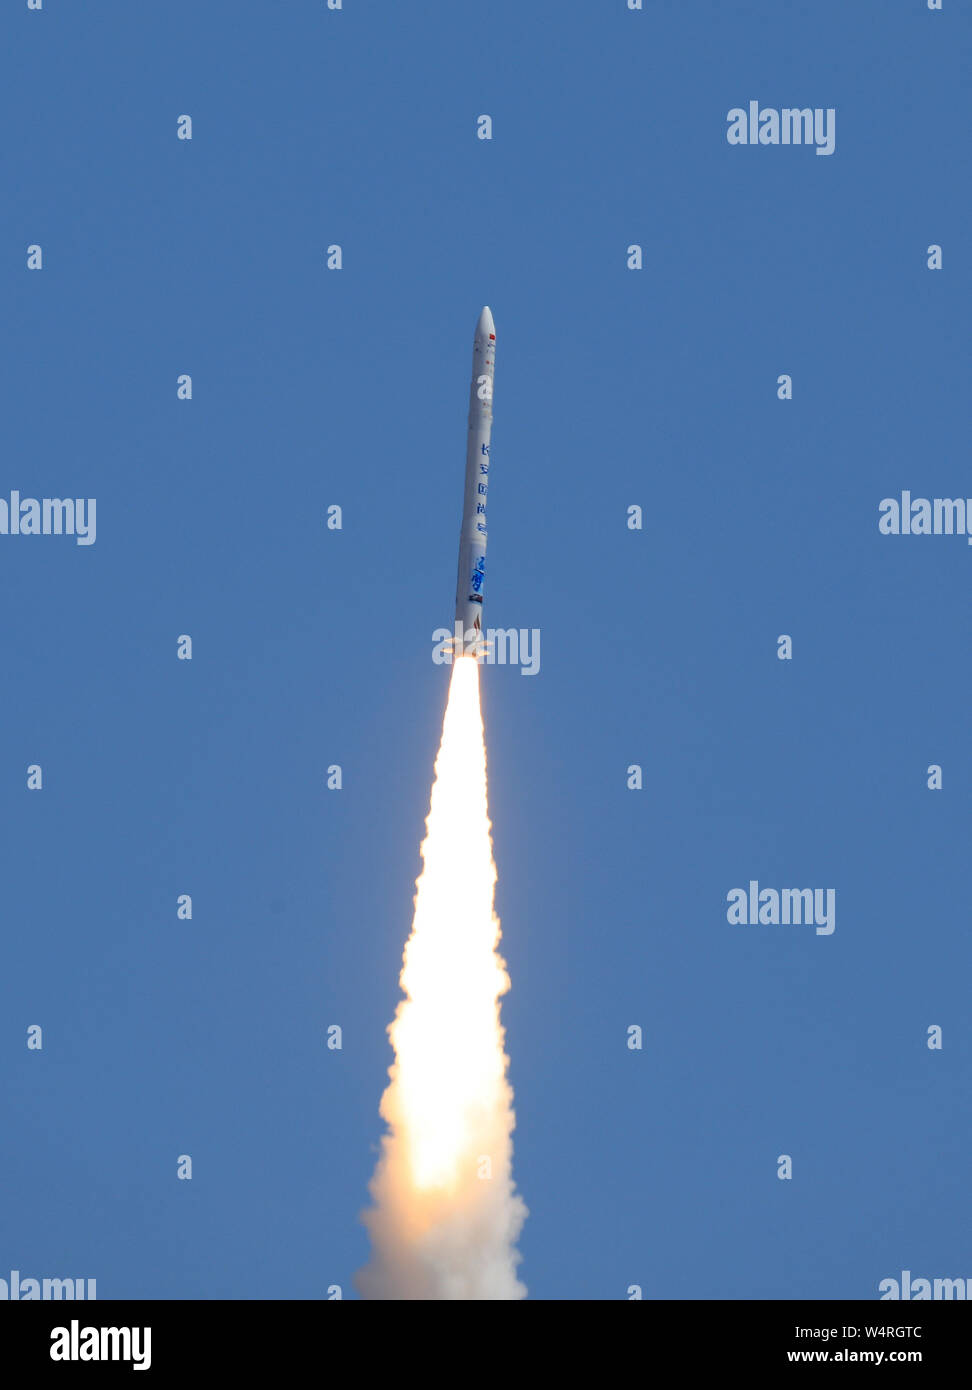 (190725) -- JIUQUAN, July 25, 2019 (Xinhua) -- A carrier rocket developed by a Chinese private company successfully sends two satellites into orbit from the Jiuquan Satellite Launch Center in northwest China, July 25, 2019. The SQX-1 Y1, developed by a Beijing-based private rocket developer i-Space, is a four-stage small commercial carrier rocket. The rocket's body has a maximum diameter of 1.4 meters, length of 20.8 meters and takeoff weight of 31 tonnes. It has a lift capability of sending 260 kg of payload to 500 km high sun-synchronous orbit. (Photo by Wang Jiangbo/Xinhua) Stock Photo